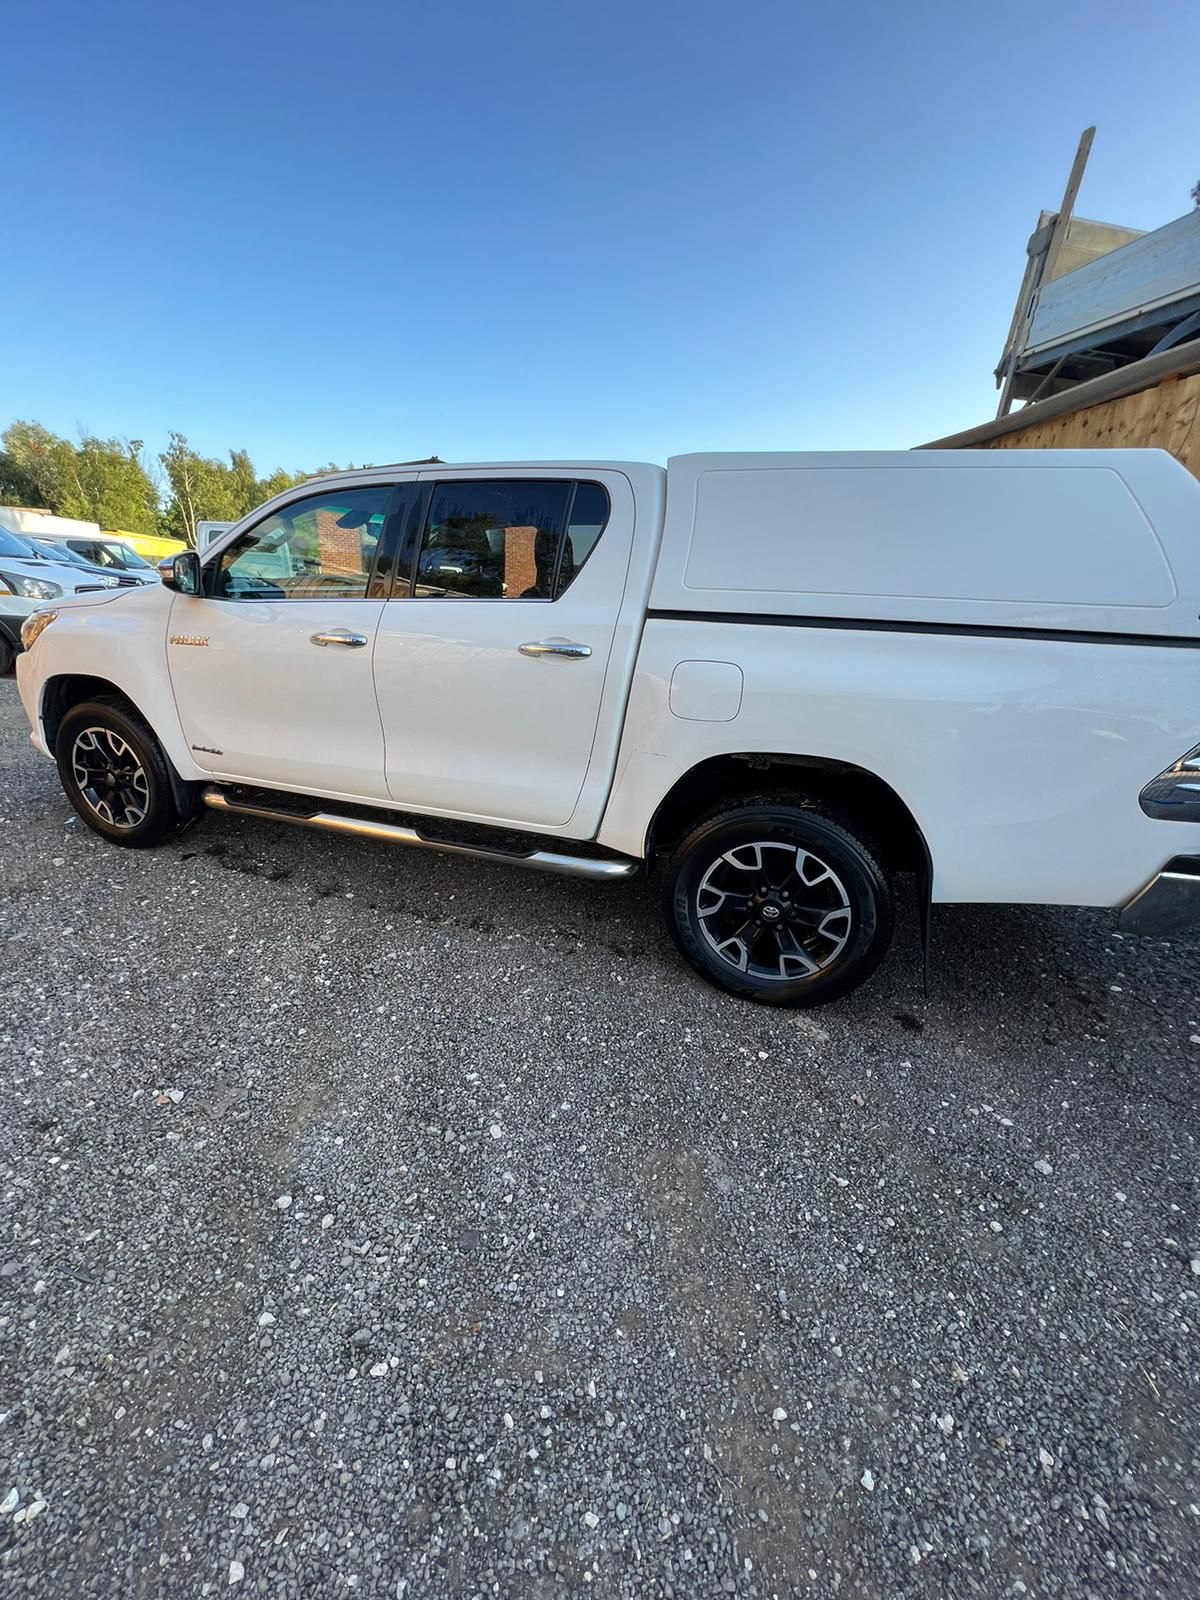 Bid on TOYOTA HILUX INVINCIBLE X DOUBLE CAB PICKUP TRUCK 67 REG- Buy &amp; Sell on Auction with EAMA Group